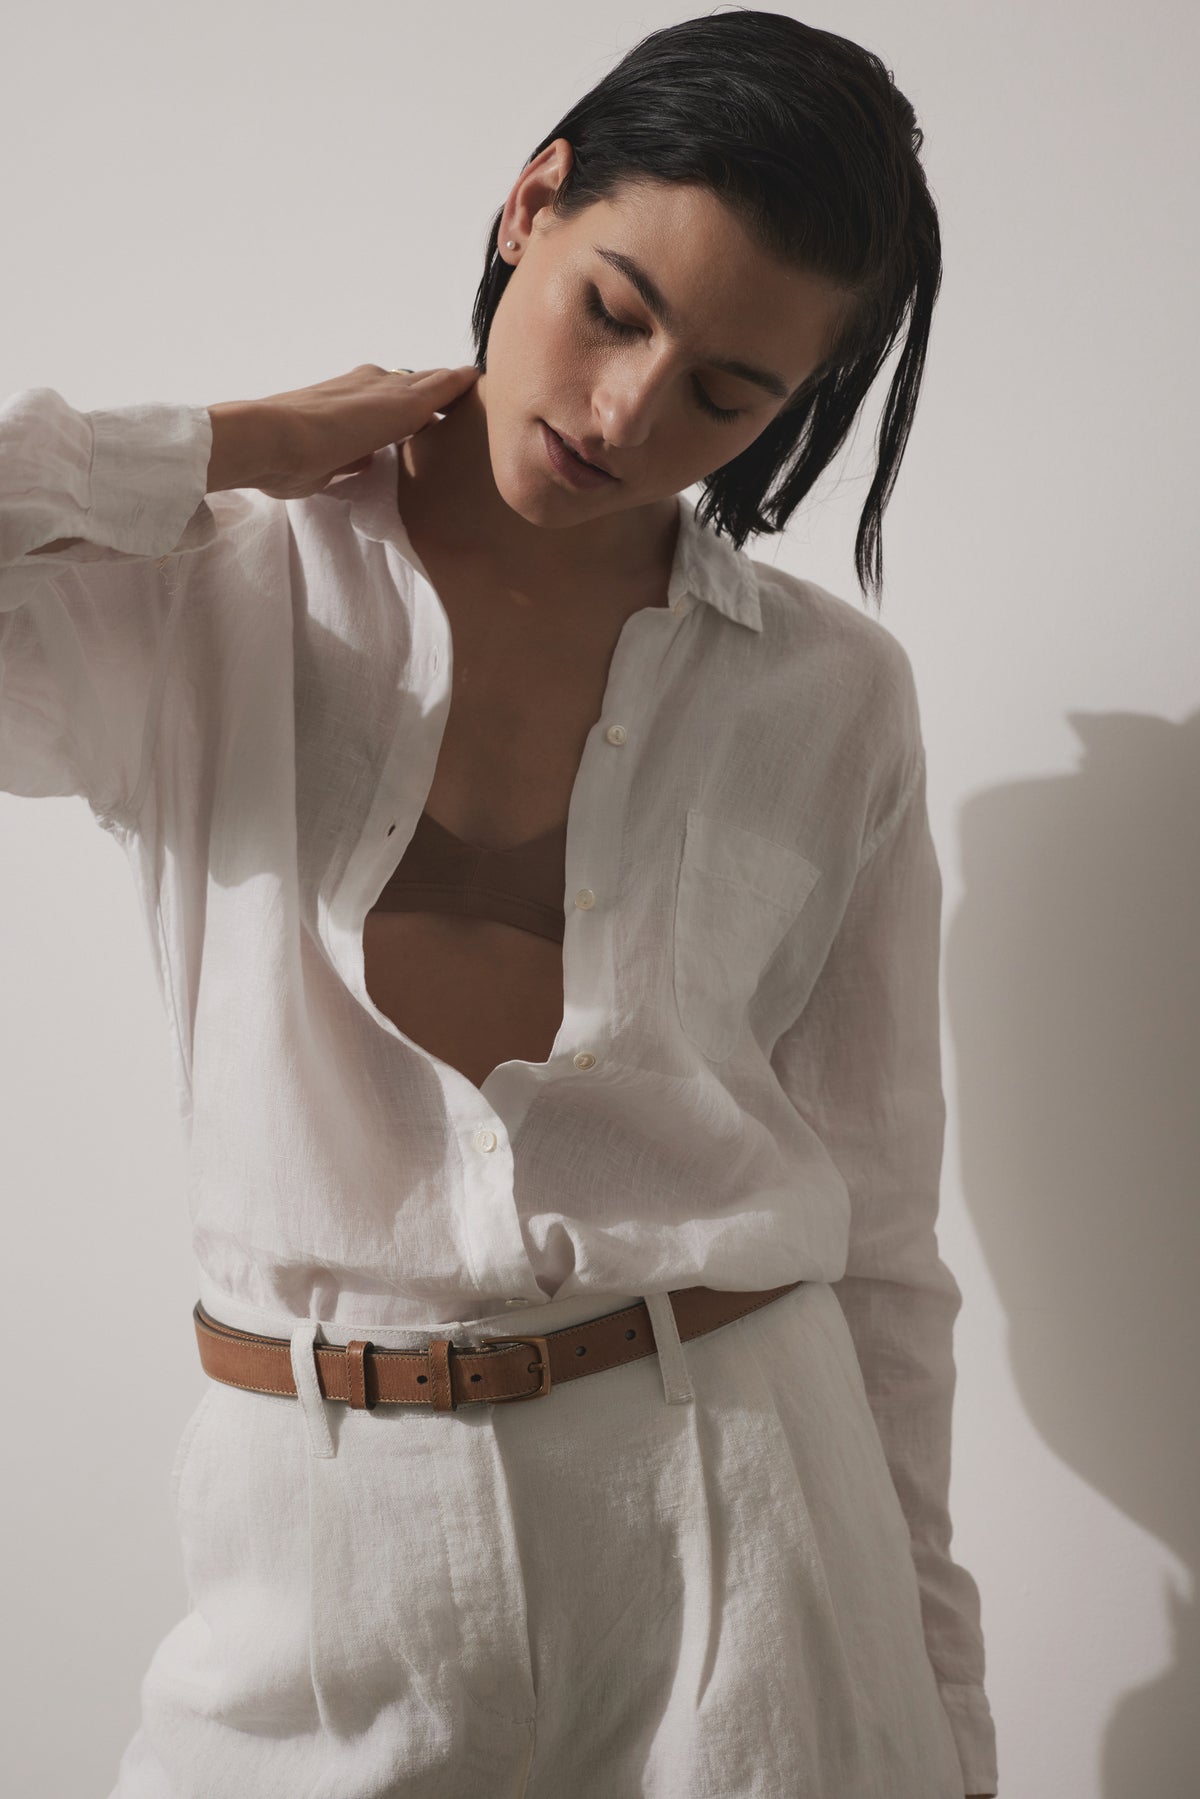 Person standing against a plain background, wearing an open white MULHOLLAND LINEN SHIRT by Velvet by Jenny Graham with a relaxed silhouette, light-colored trousers, and a brown belt, with one hand resting on the back of their neck.-37018505085121